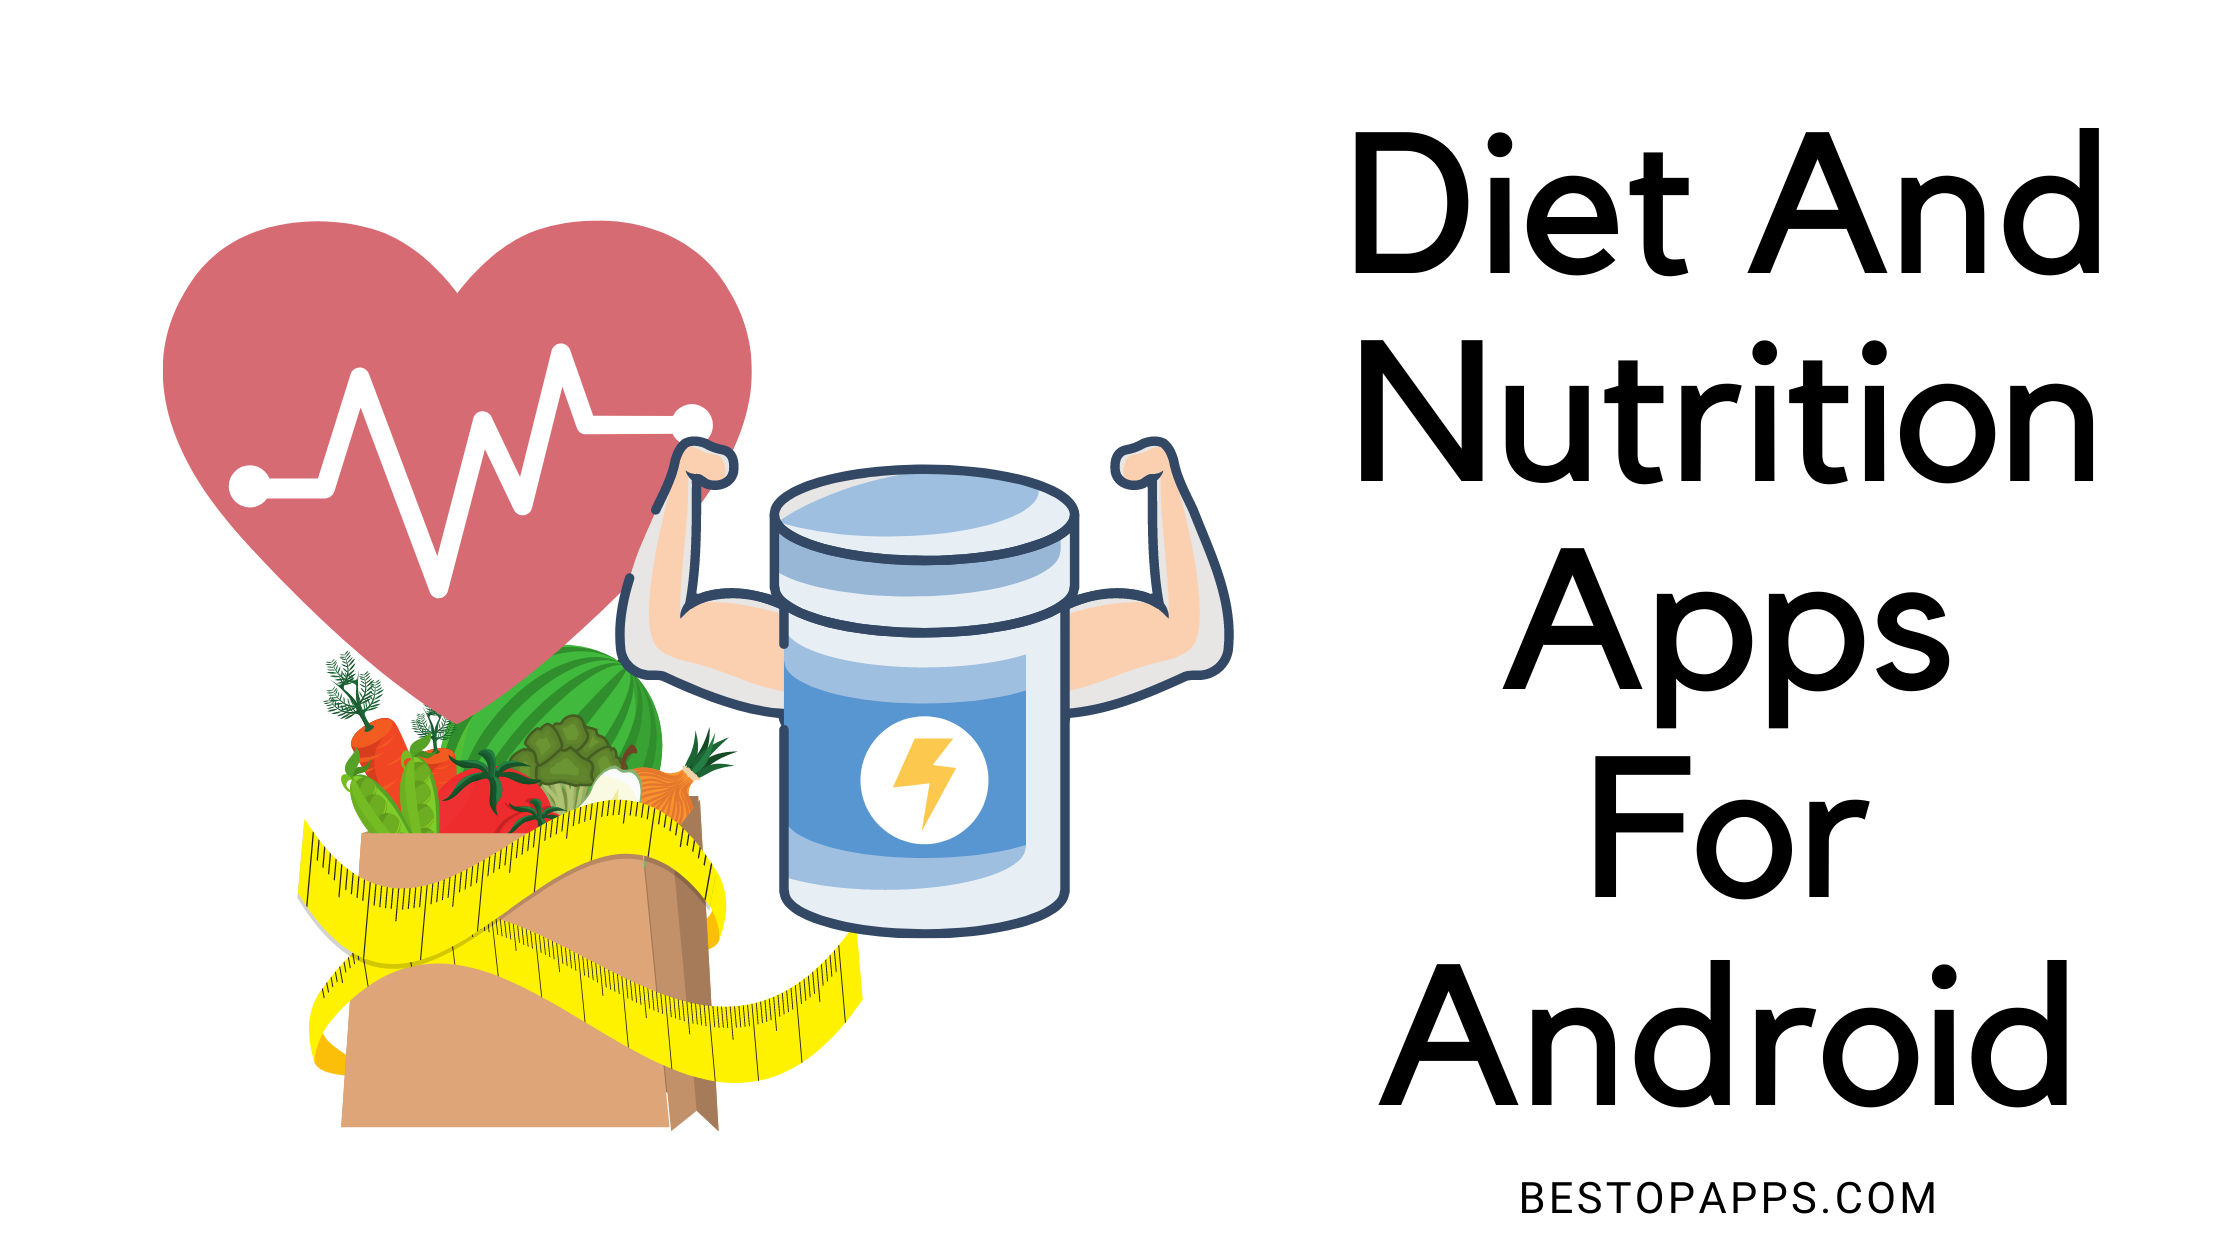 Diet And Nutrition Apps For Android